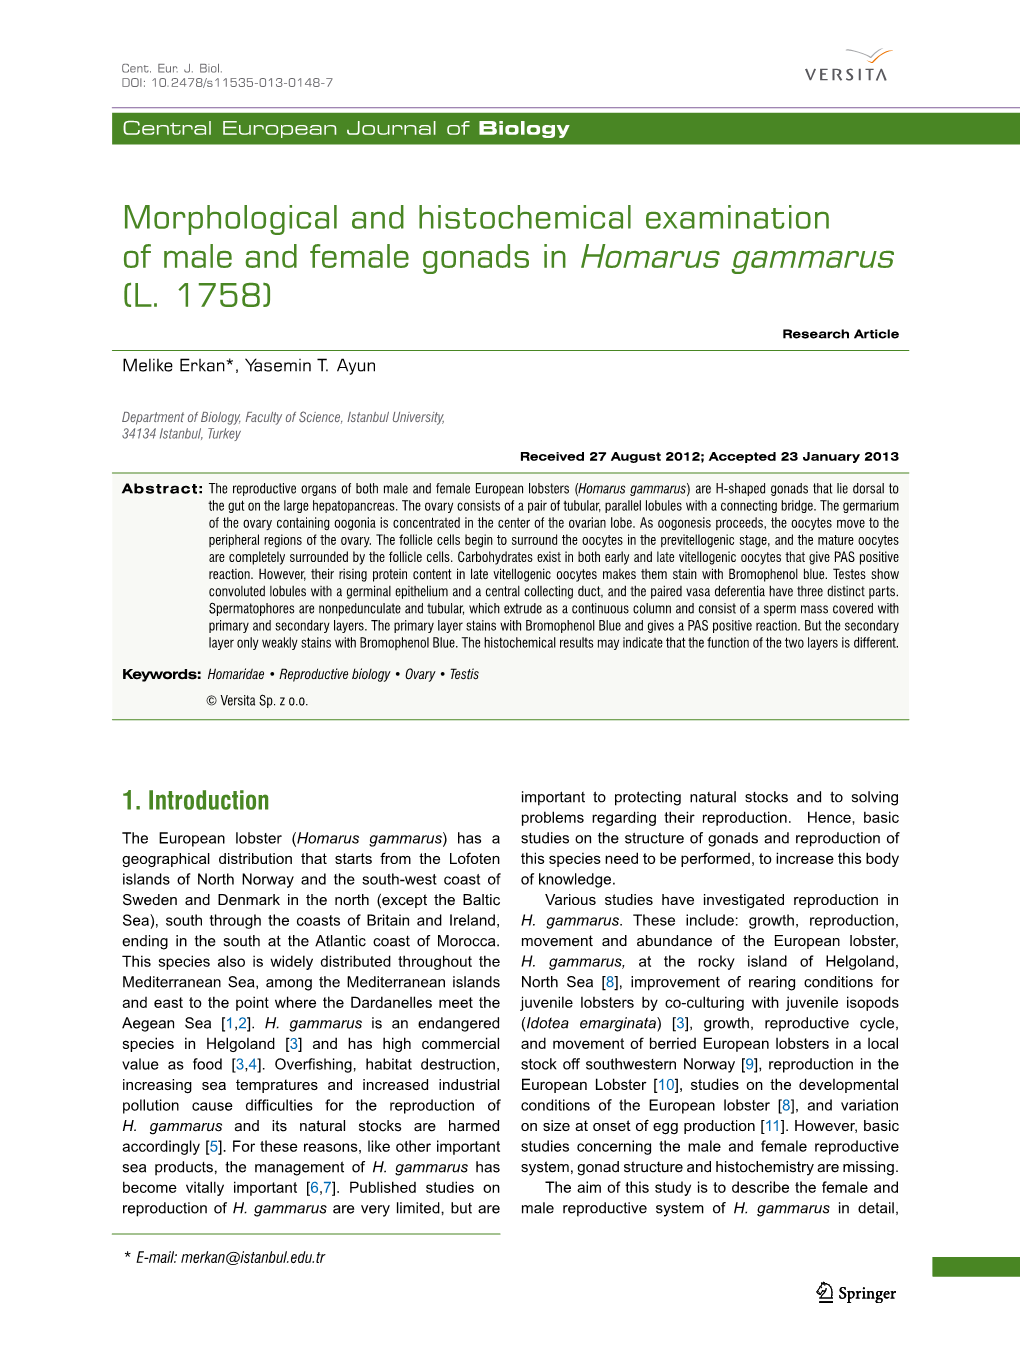 Morphological and Histochemical Examination of Male and Female Gonads in Homarus Gammarus (L